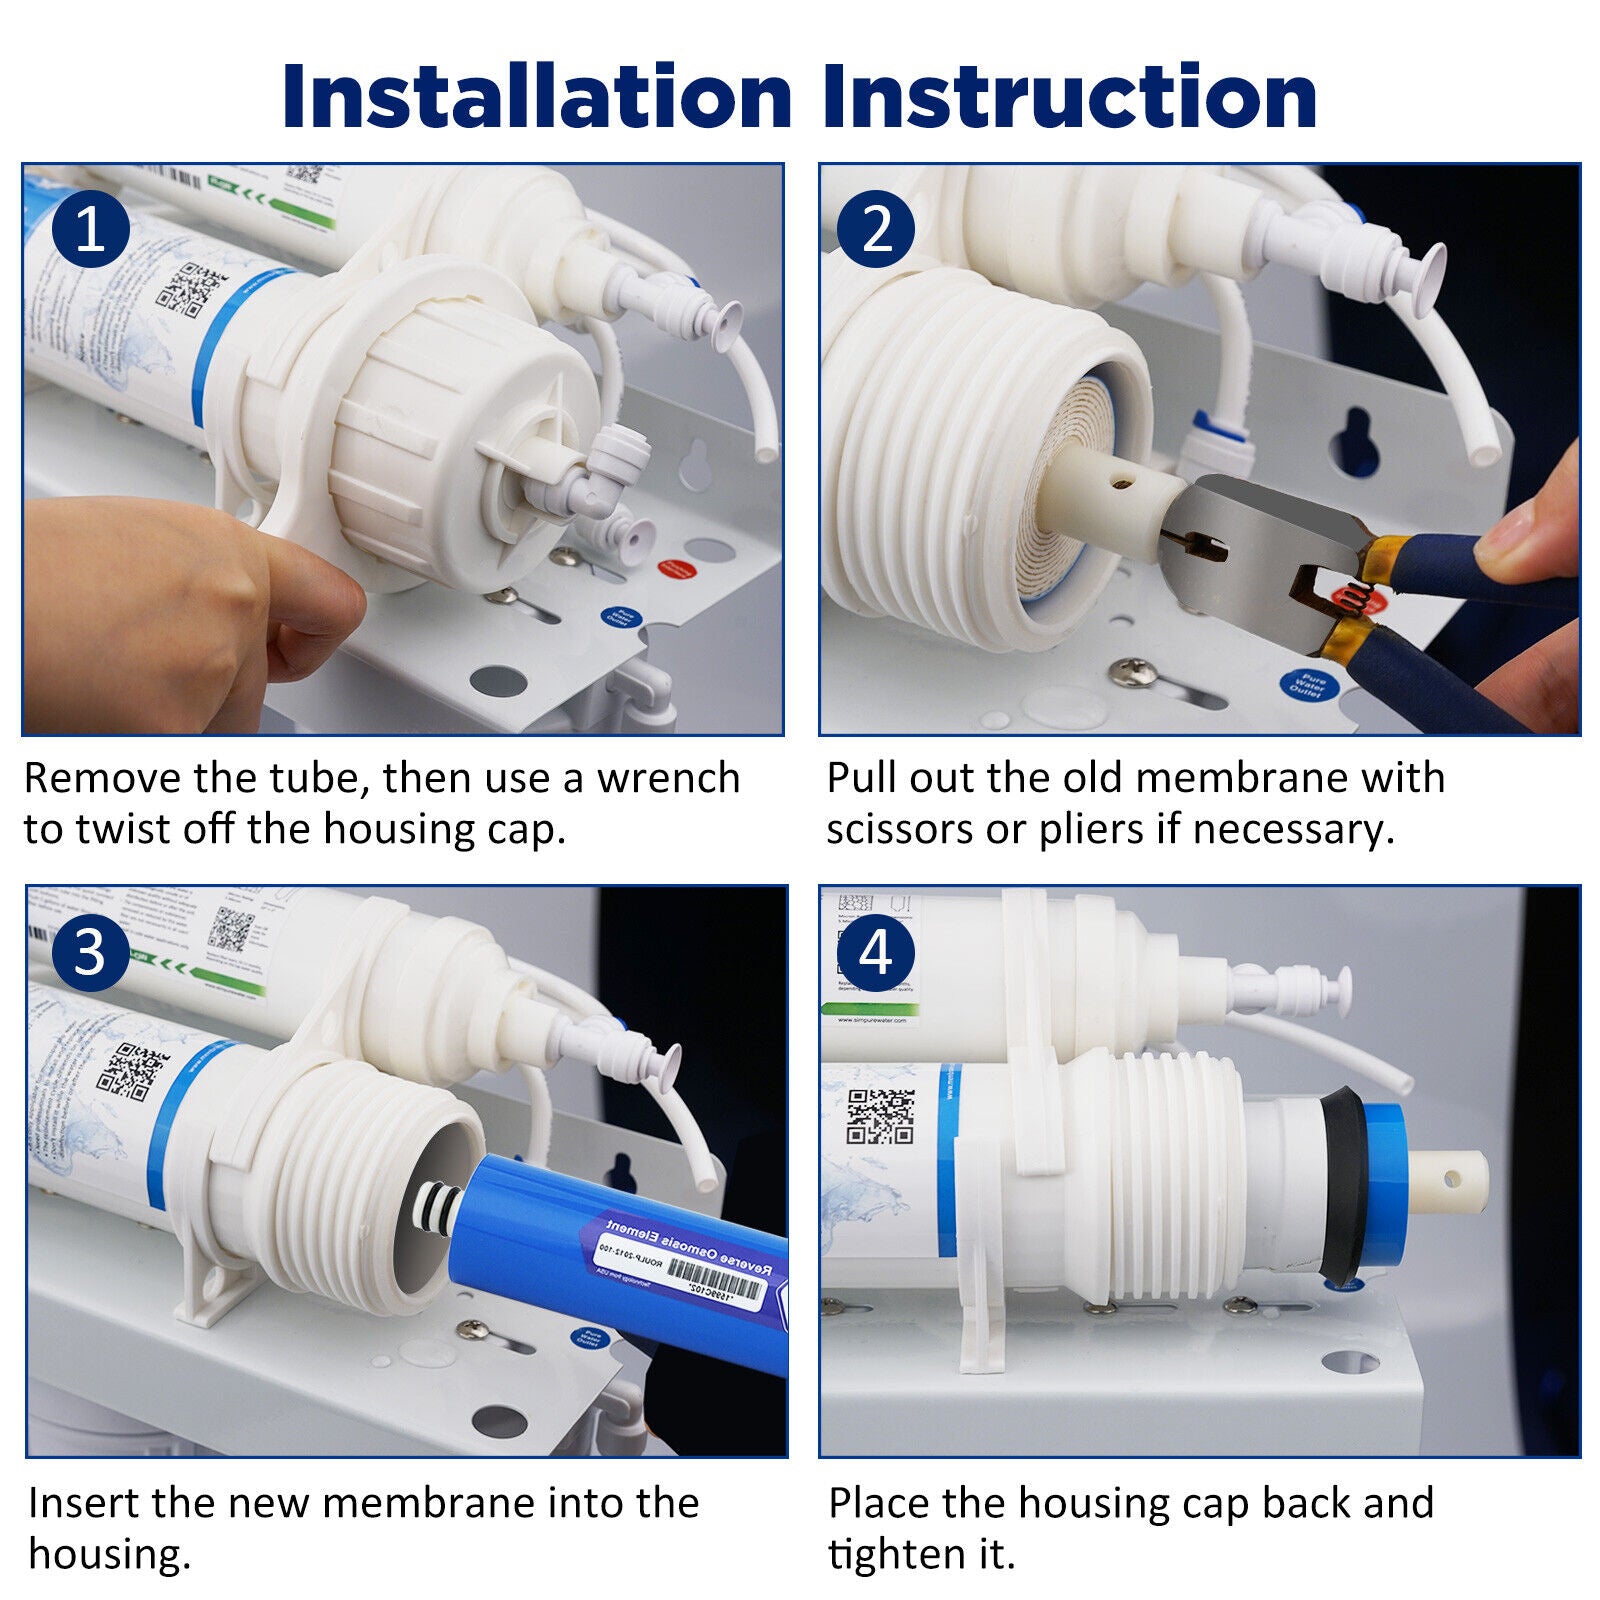 Membrane Solutions RO Membrane, Reverse Osmosis Membrane System Water Filter 1812/3012 Replacement